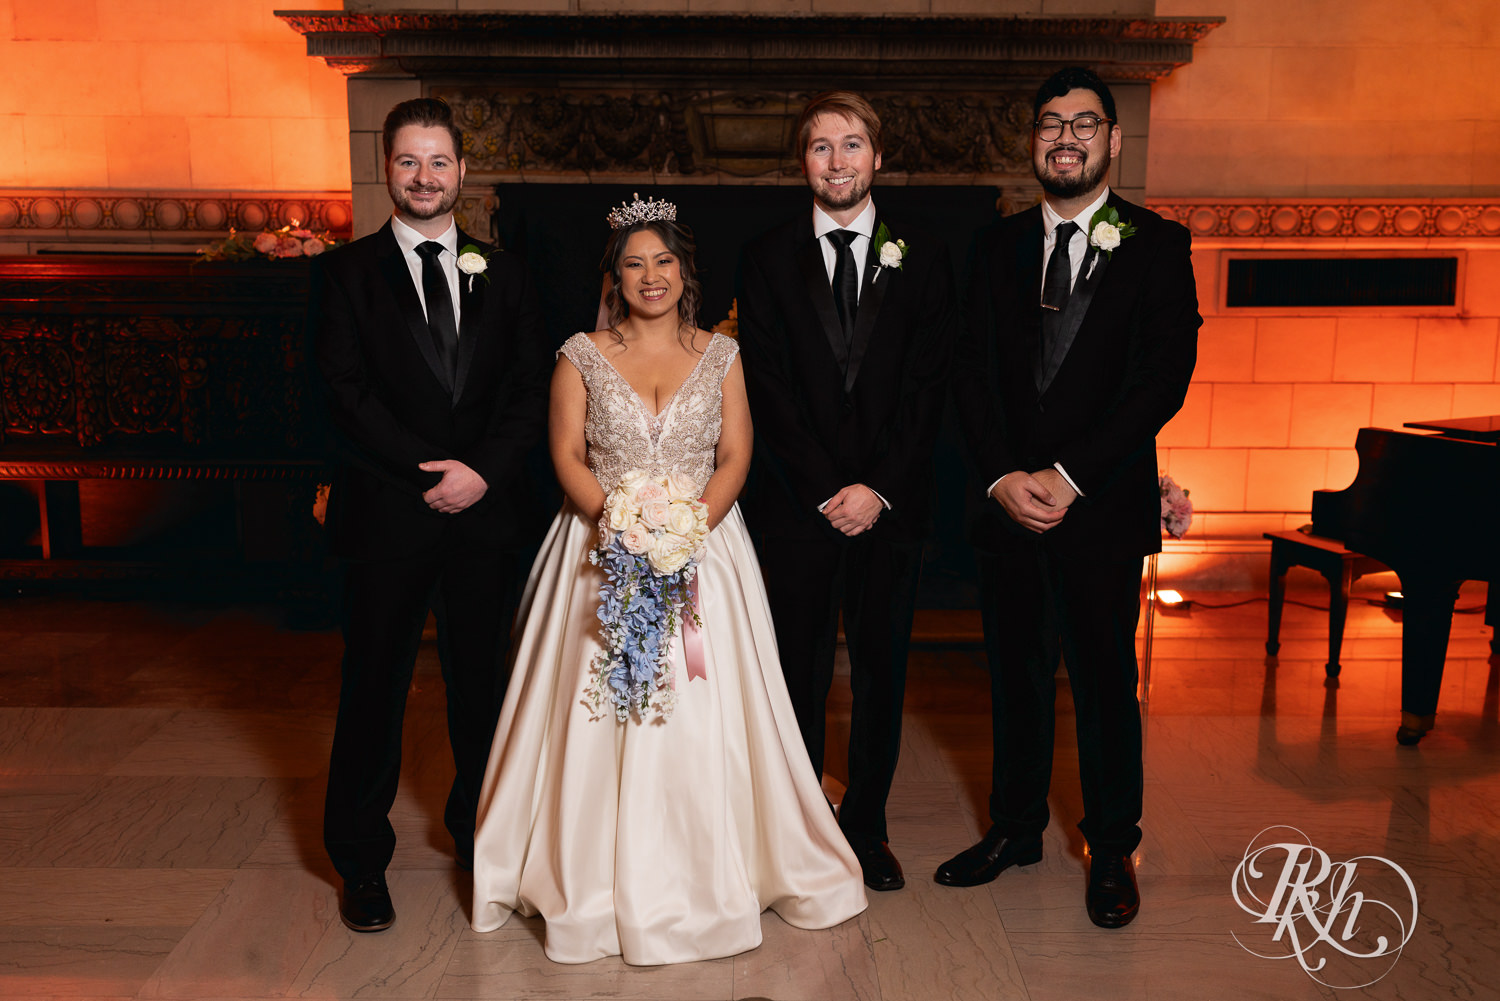 Hmong bride smiles with wedding party at the Saint Paul Athletic Club in Saint Paul, Minnesota.